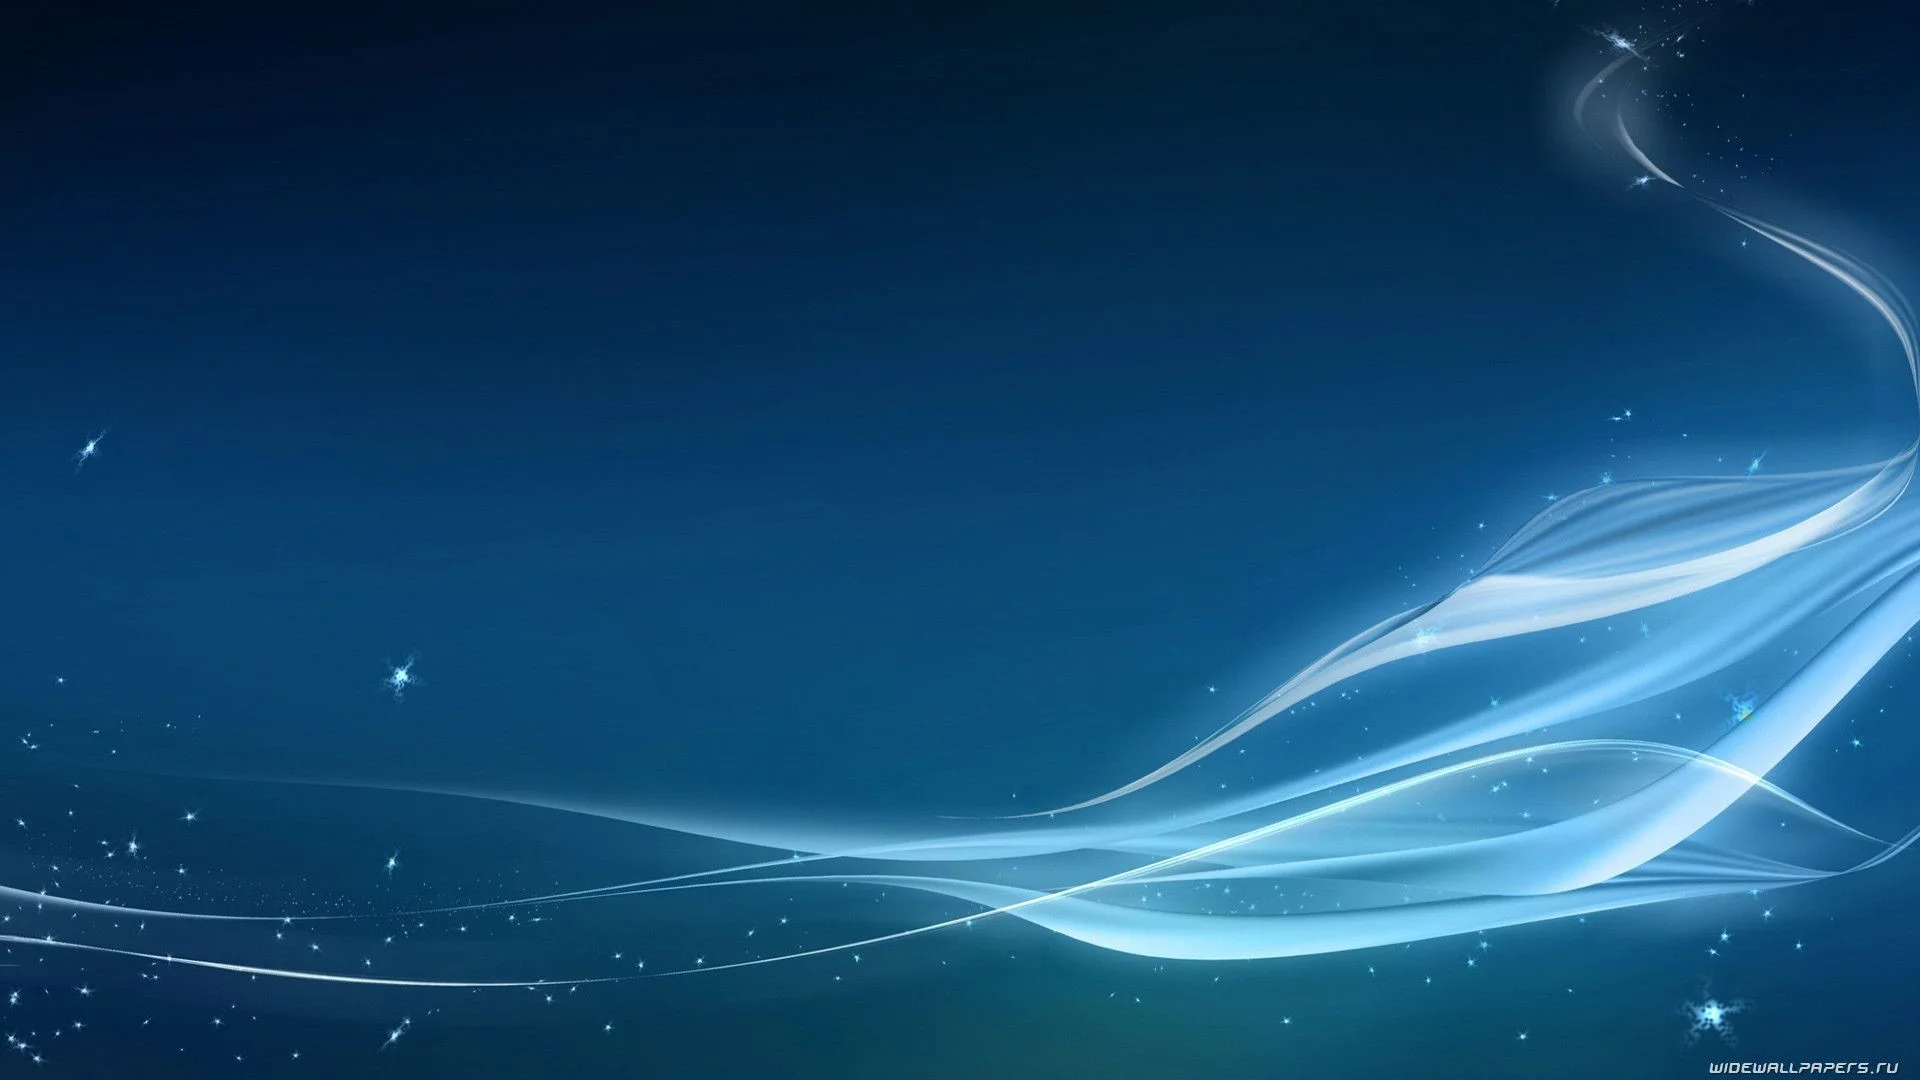 Blue Abstract Wallpaper For PC Blue Abstract Wallpapers in HQ